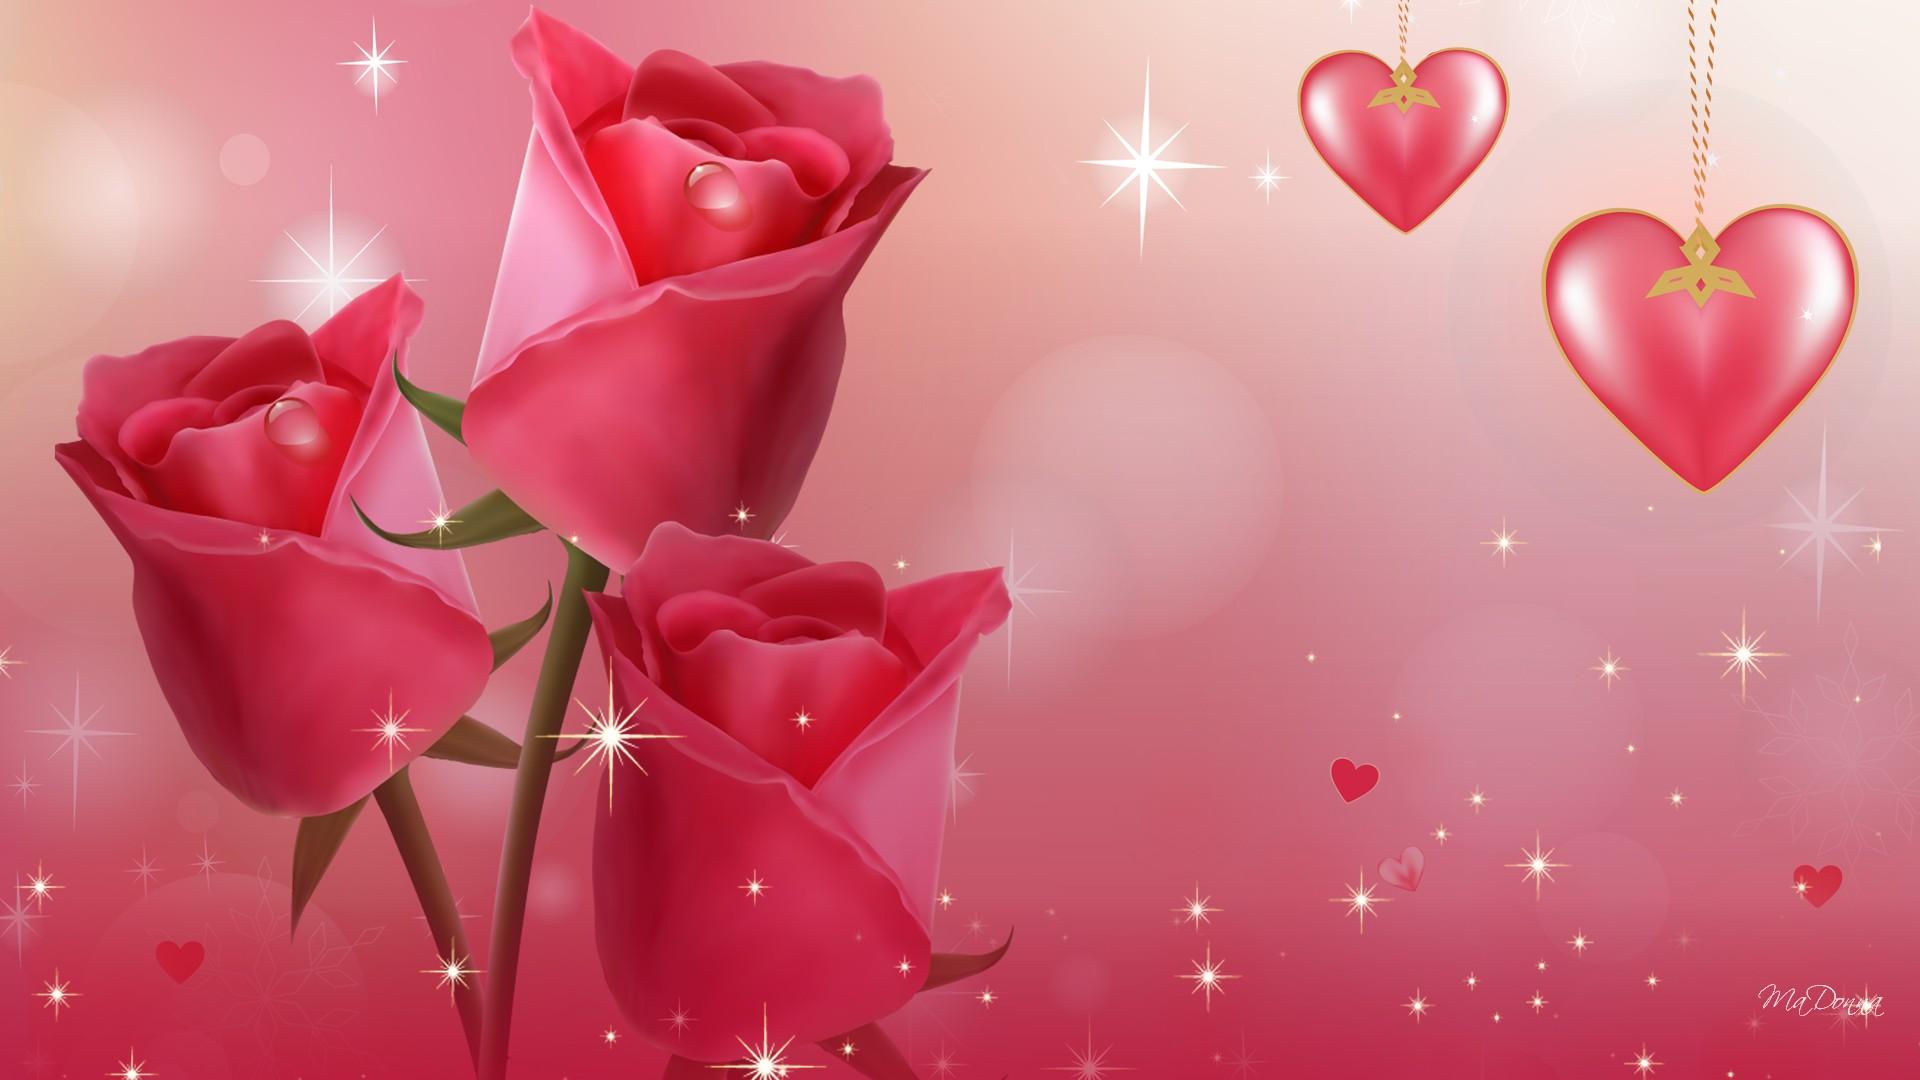 Love wallpapers free download 